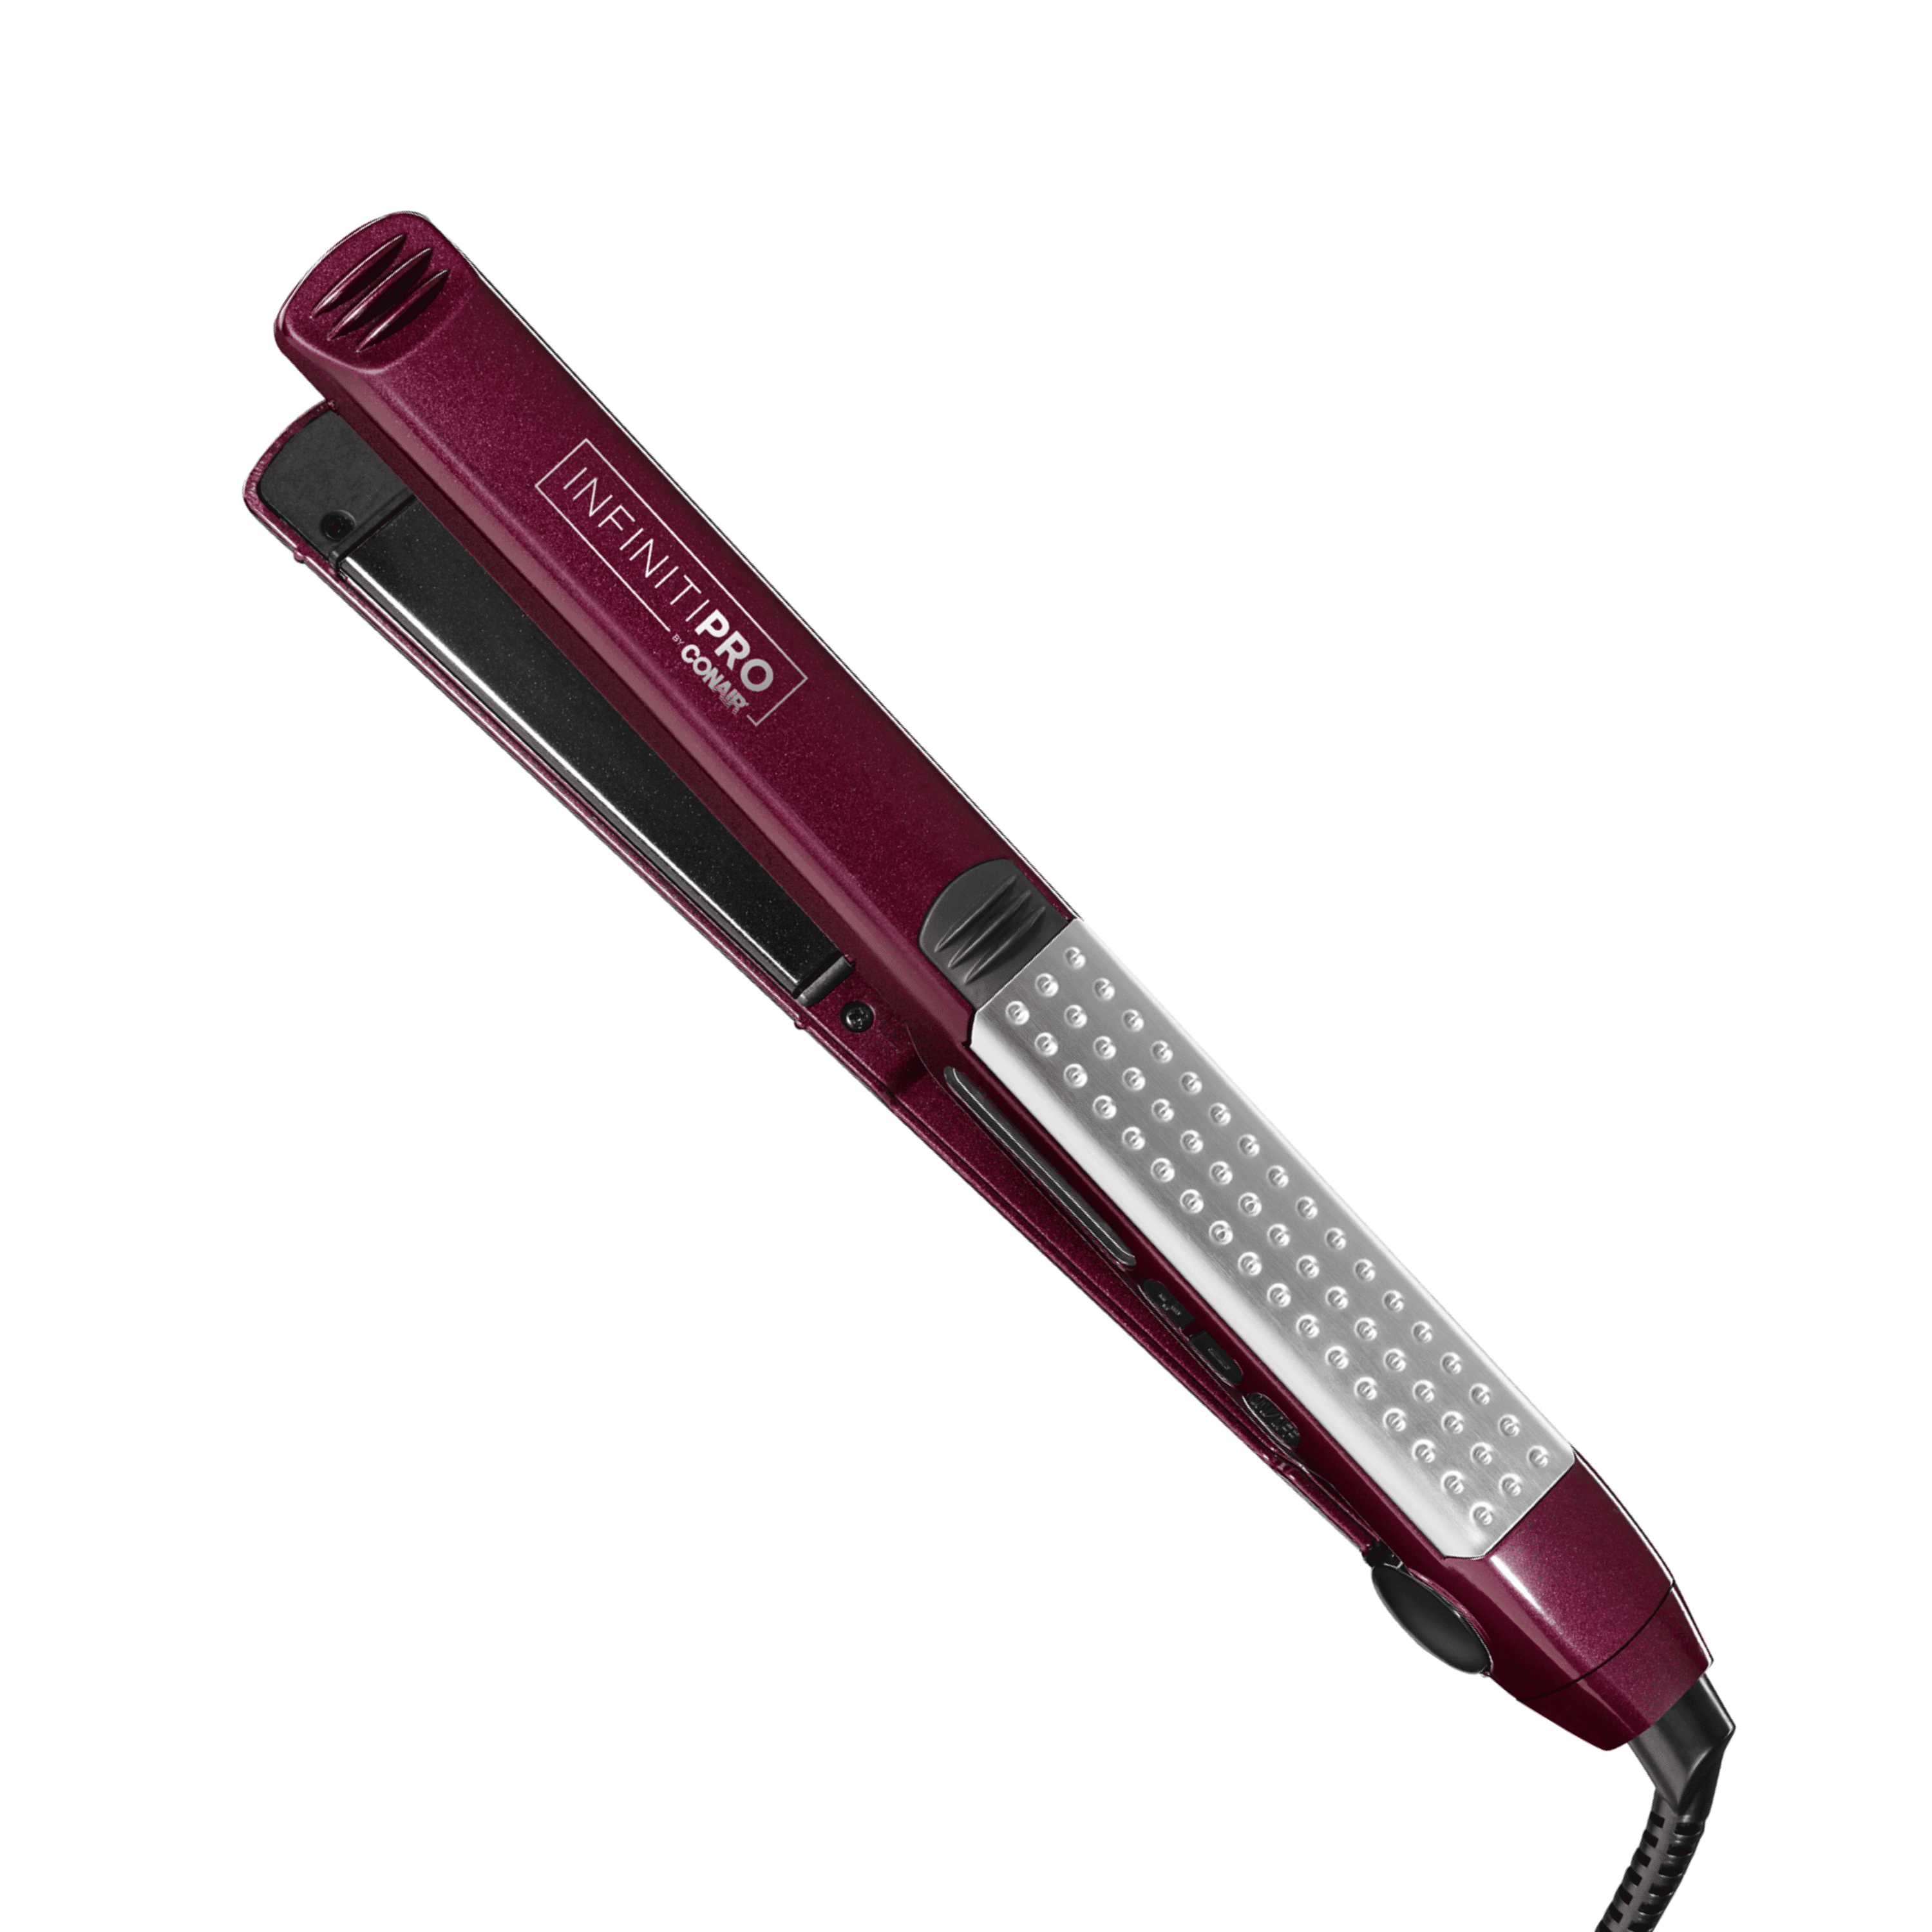 Bluebell Viscous Conclusion ghd Platinum Plus Professional Performance Styler flat Iron, White, 1" -  Walmart.com